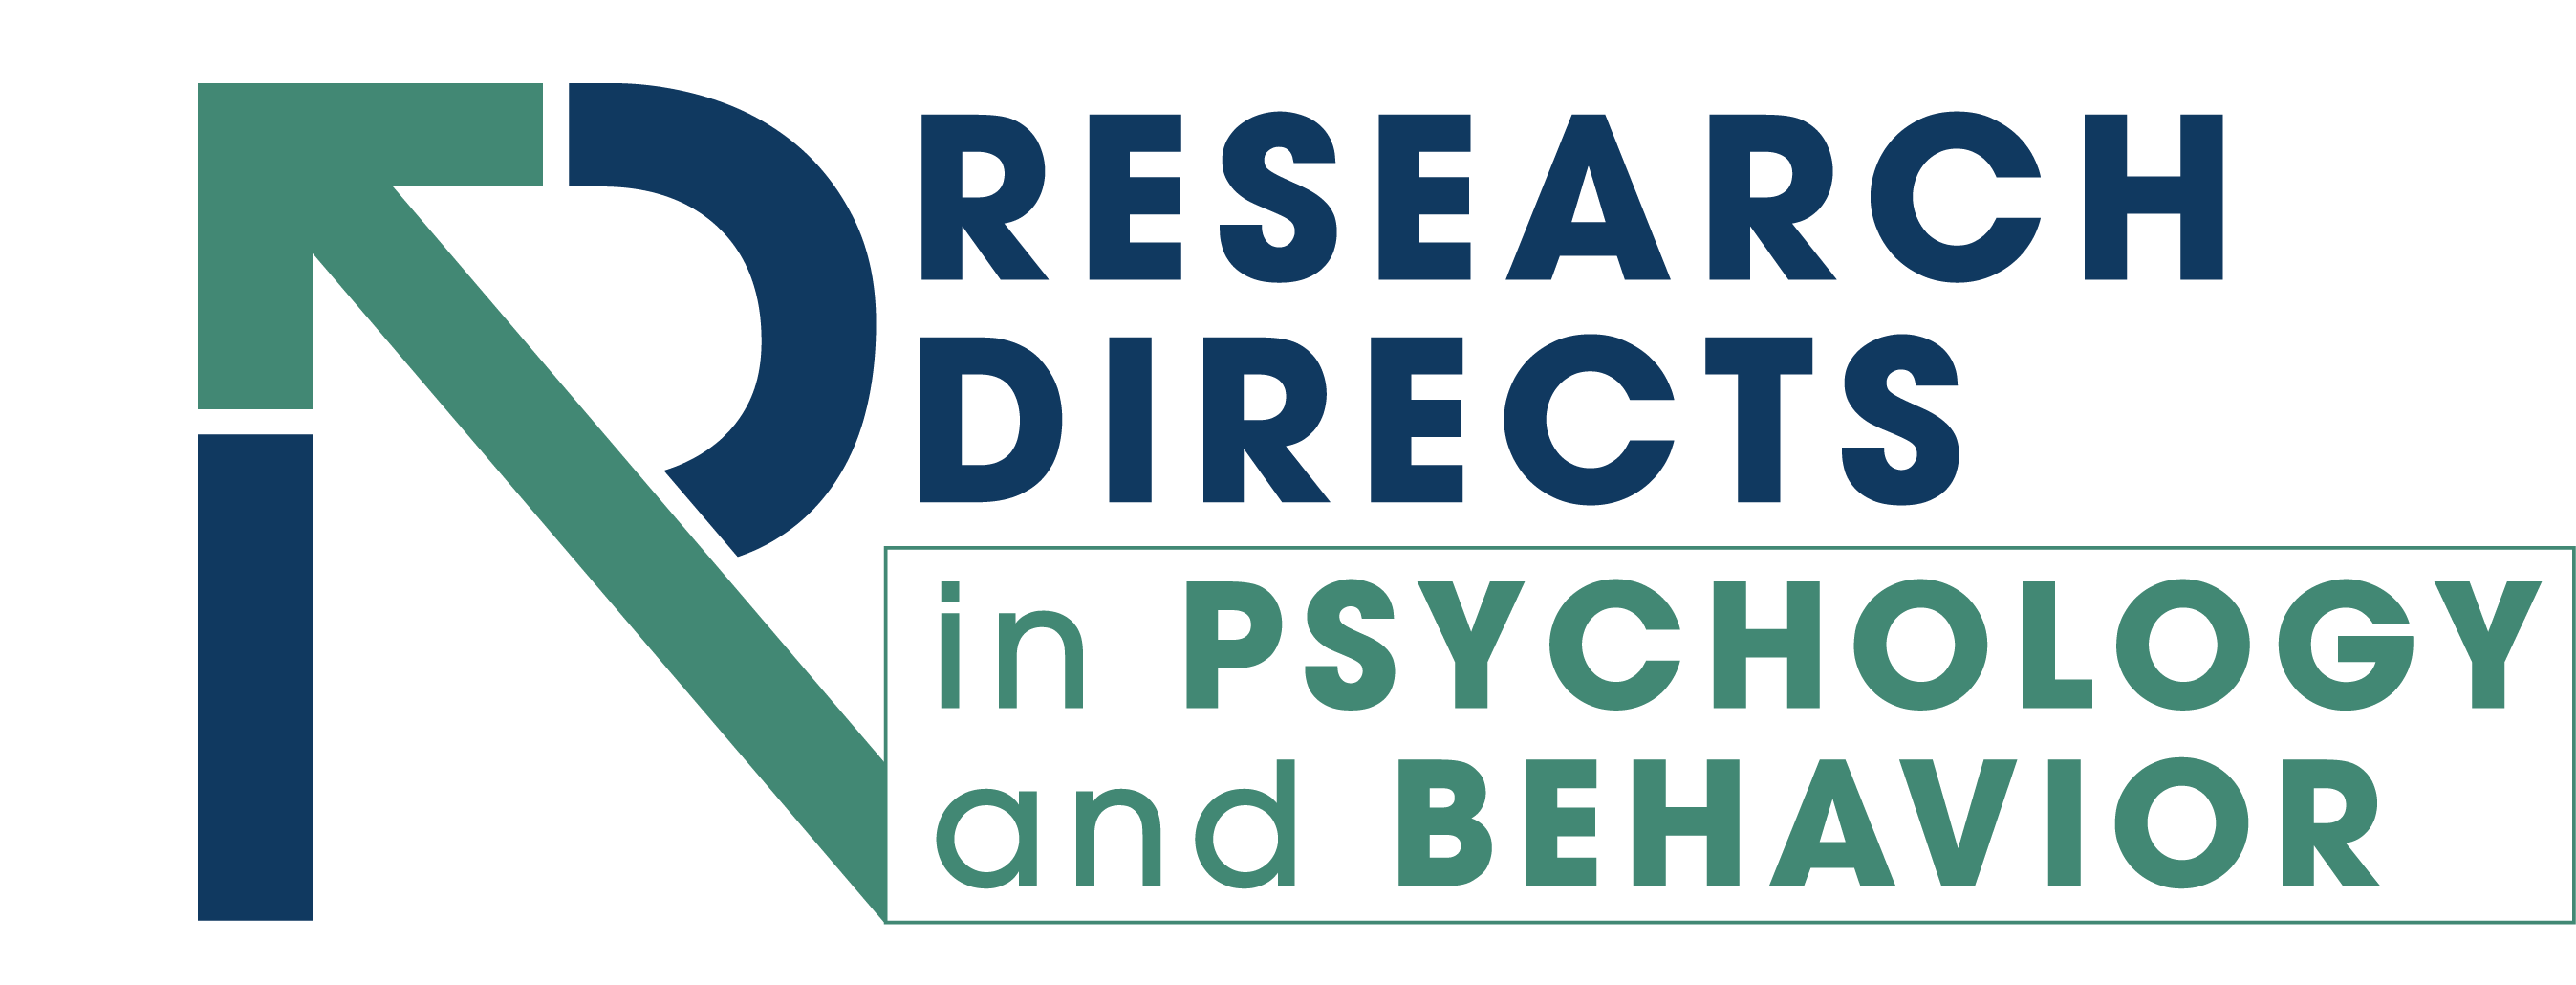 Research Directs in Psychology and Behavior